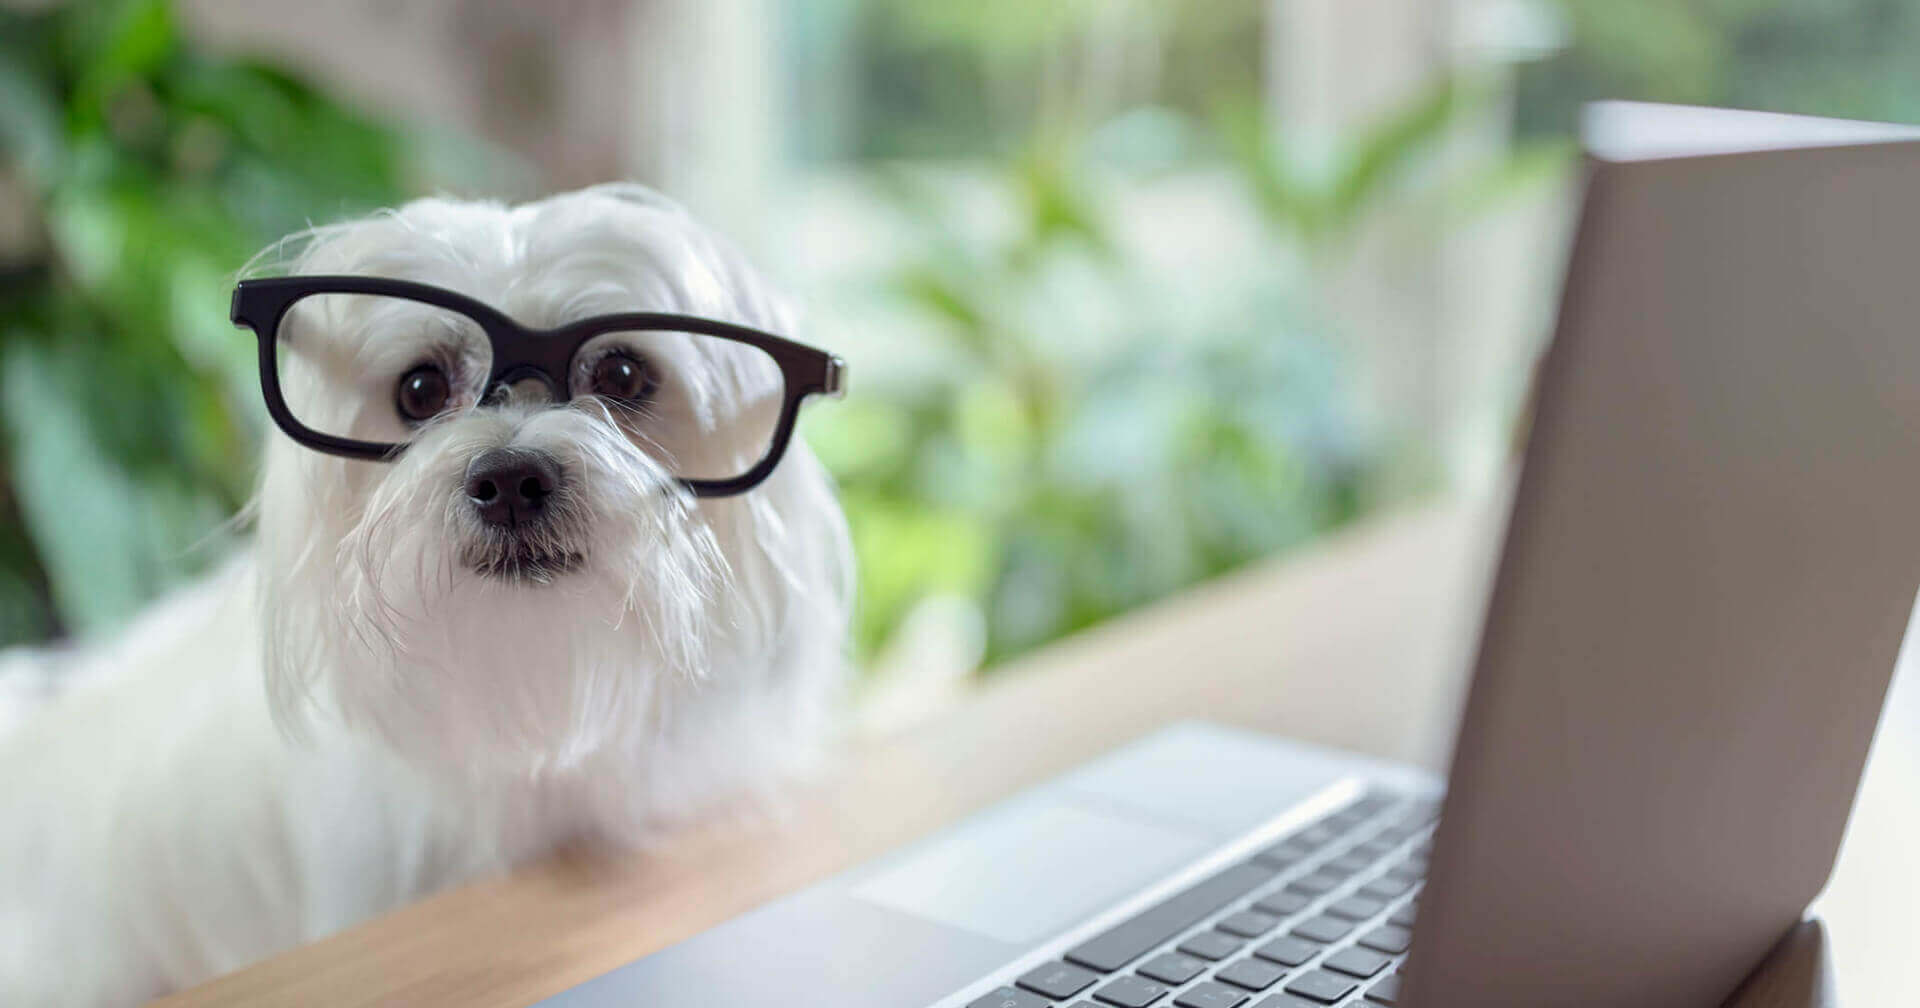 A white terrier with glasses on sat at a desk looking at a laptop